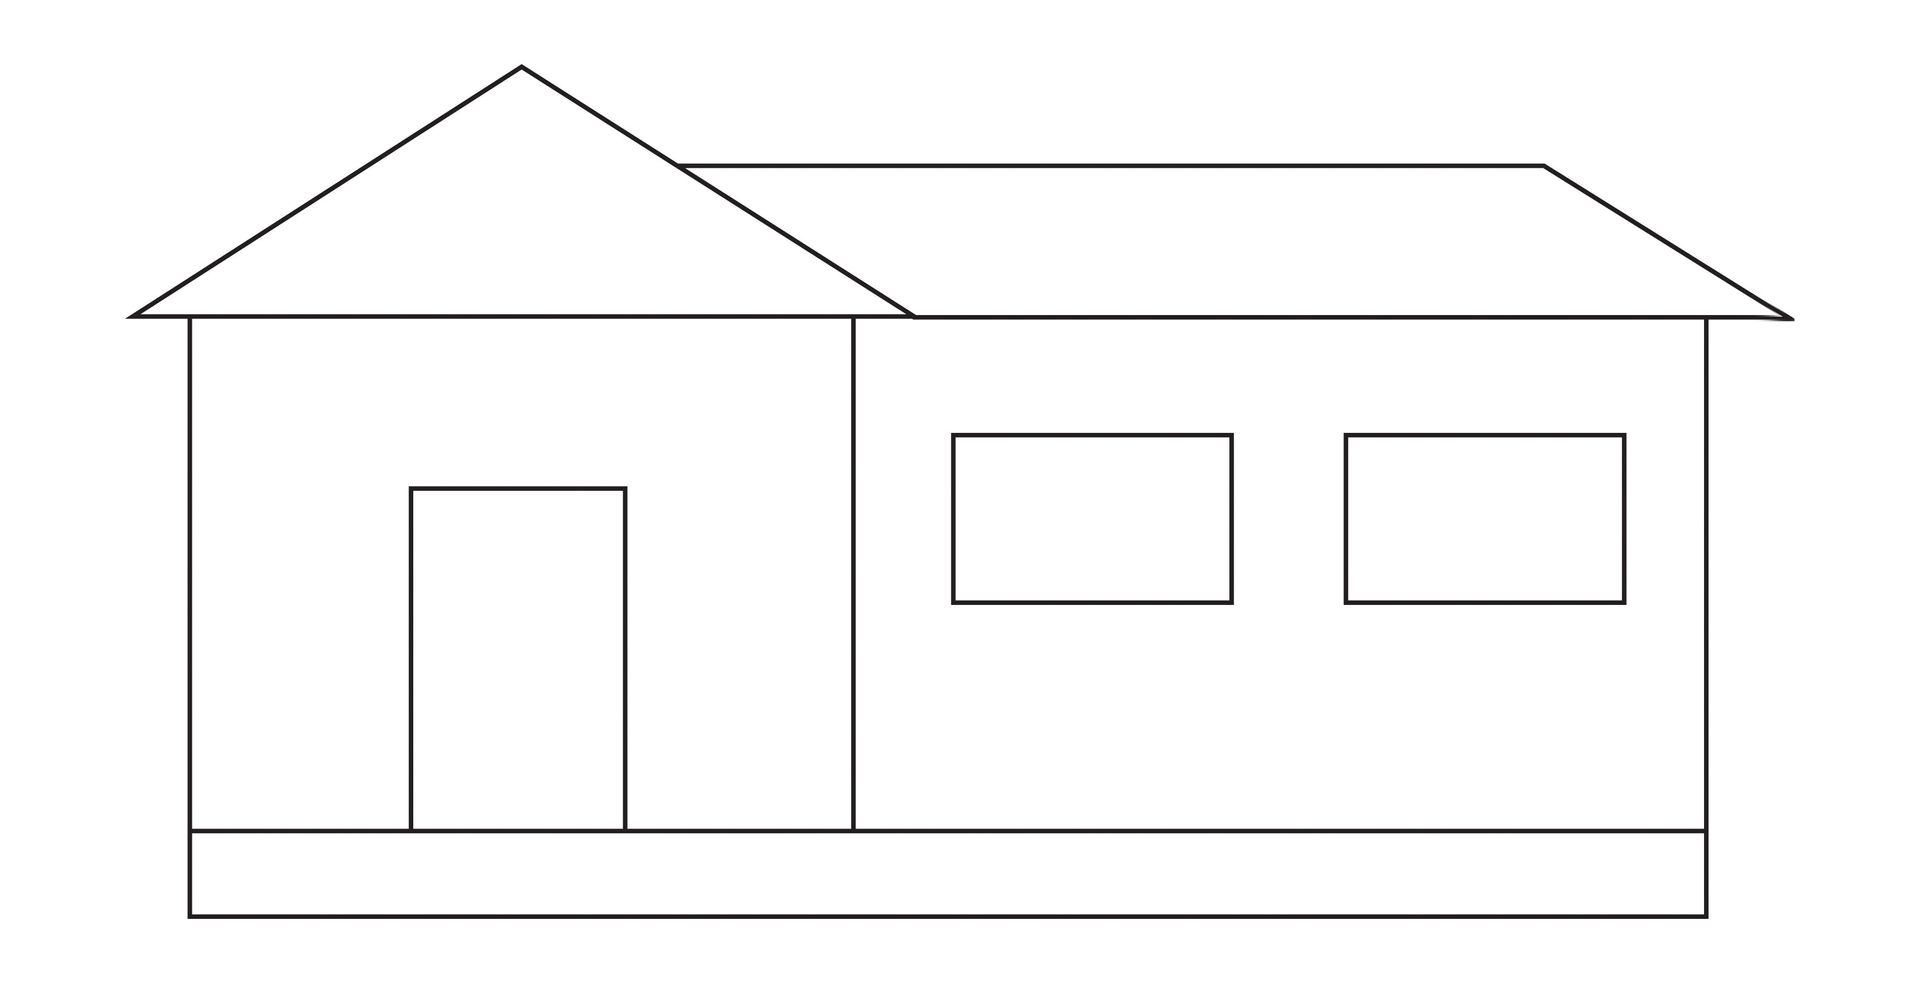 A simple illustration of a house on a large foundation.